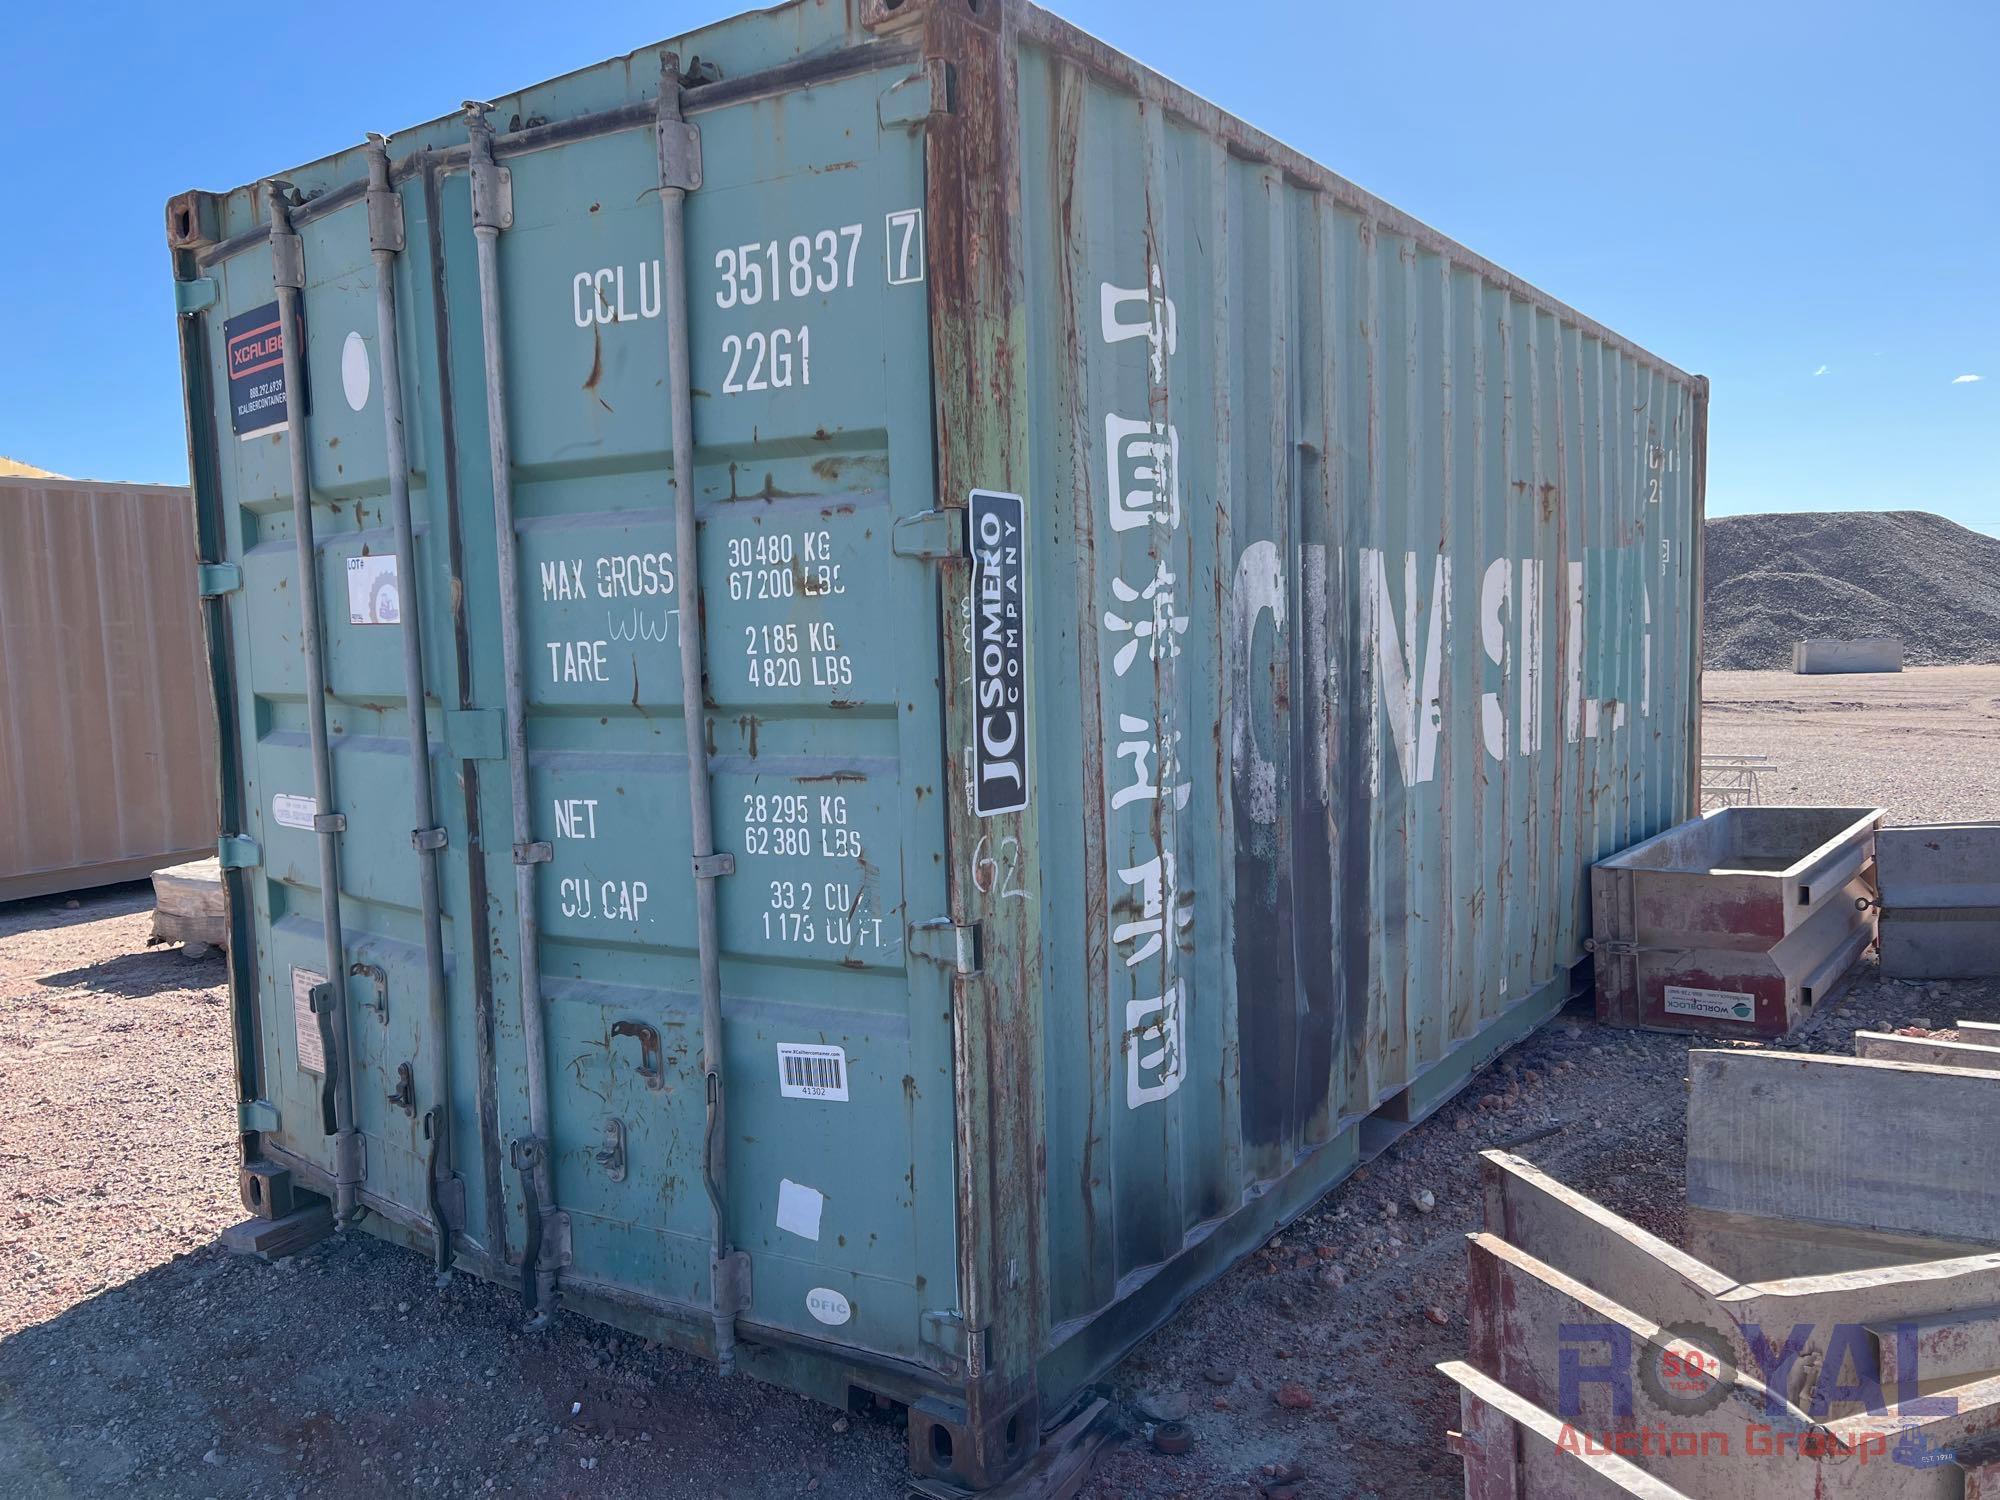 2012 20ft Shipping Container